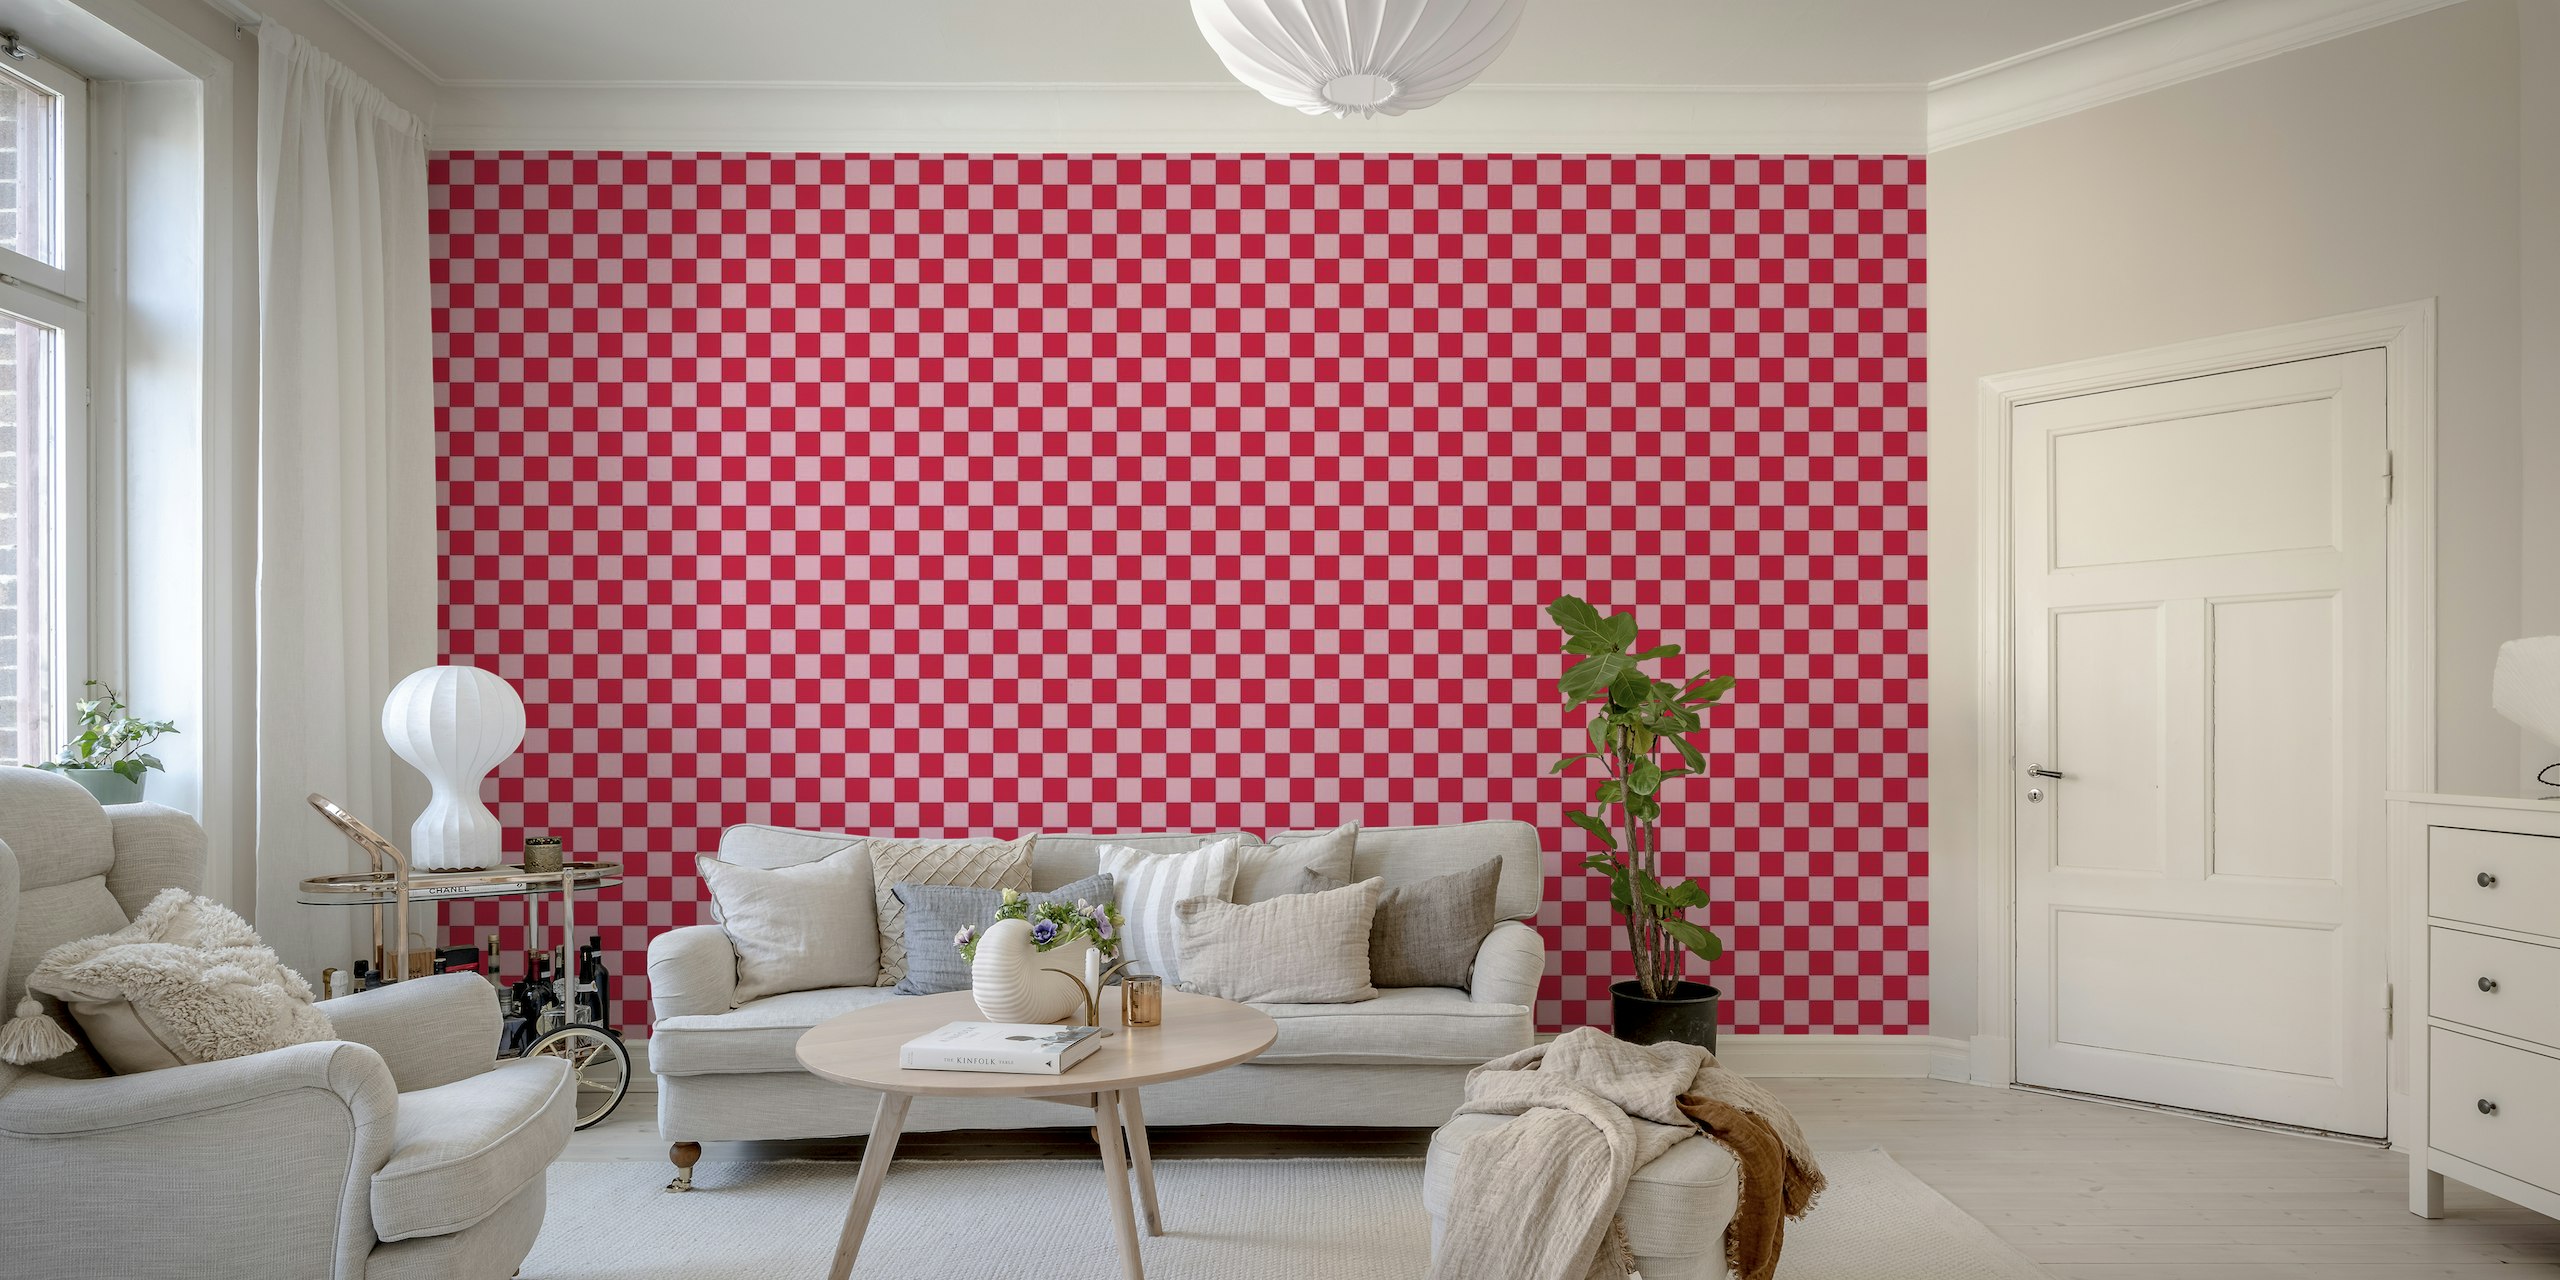 Checkerboard - Pink and Red wallpaper